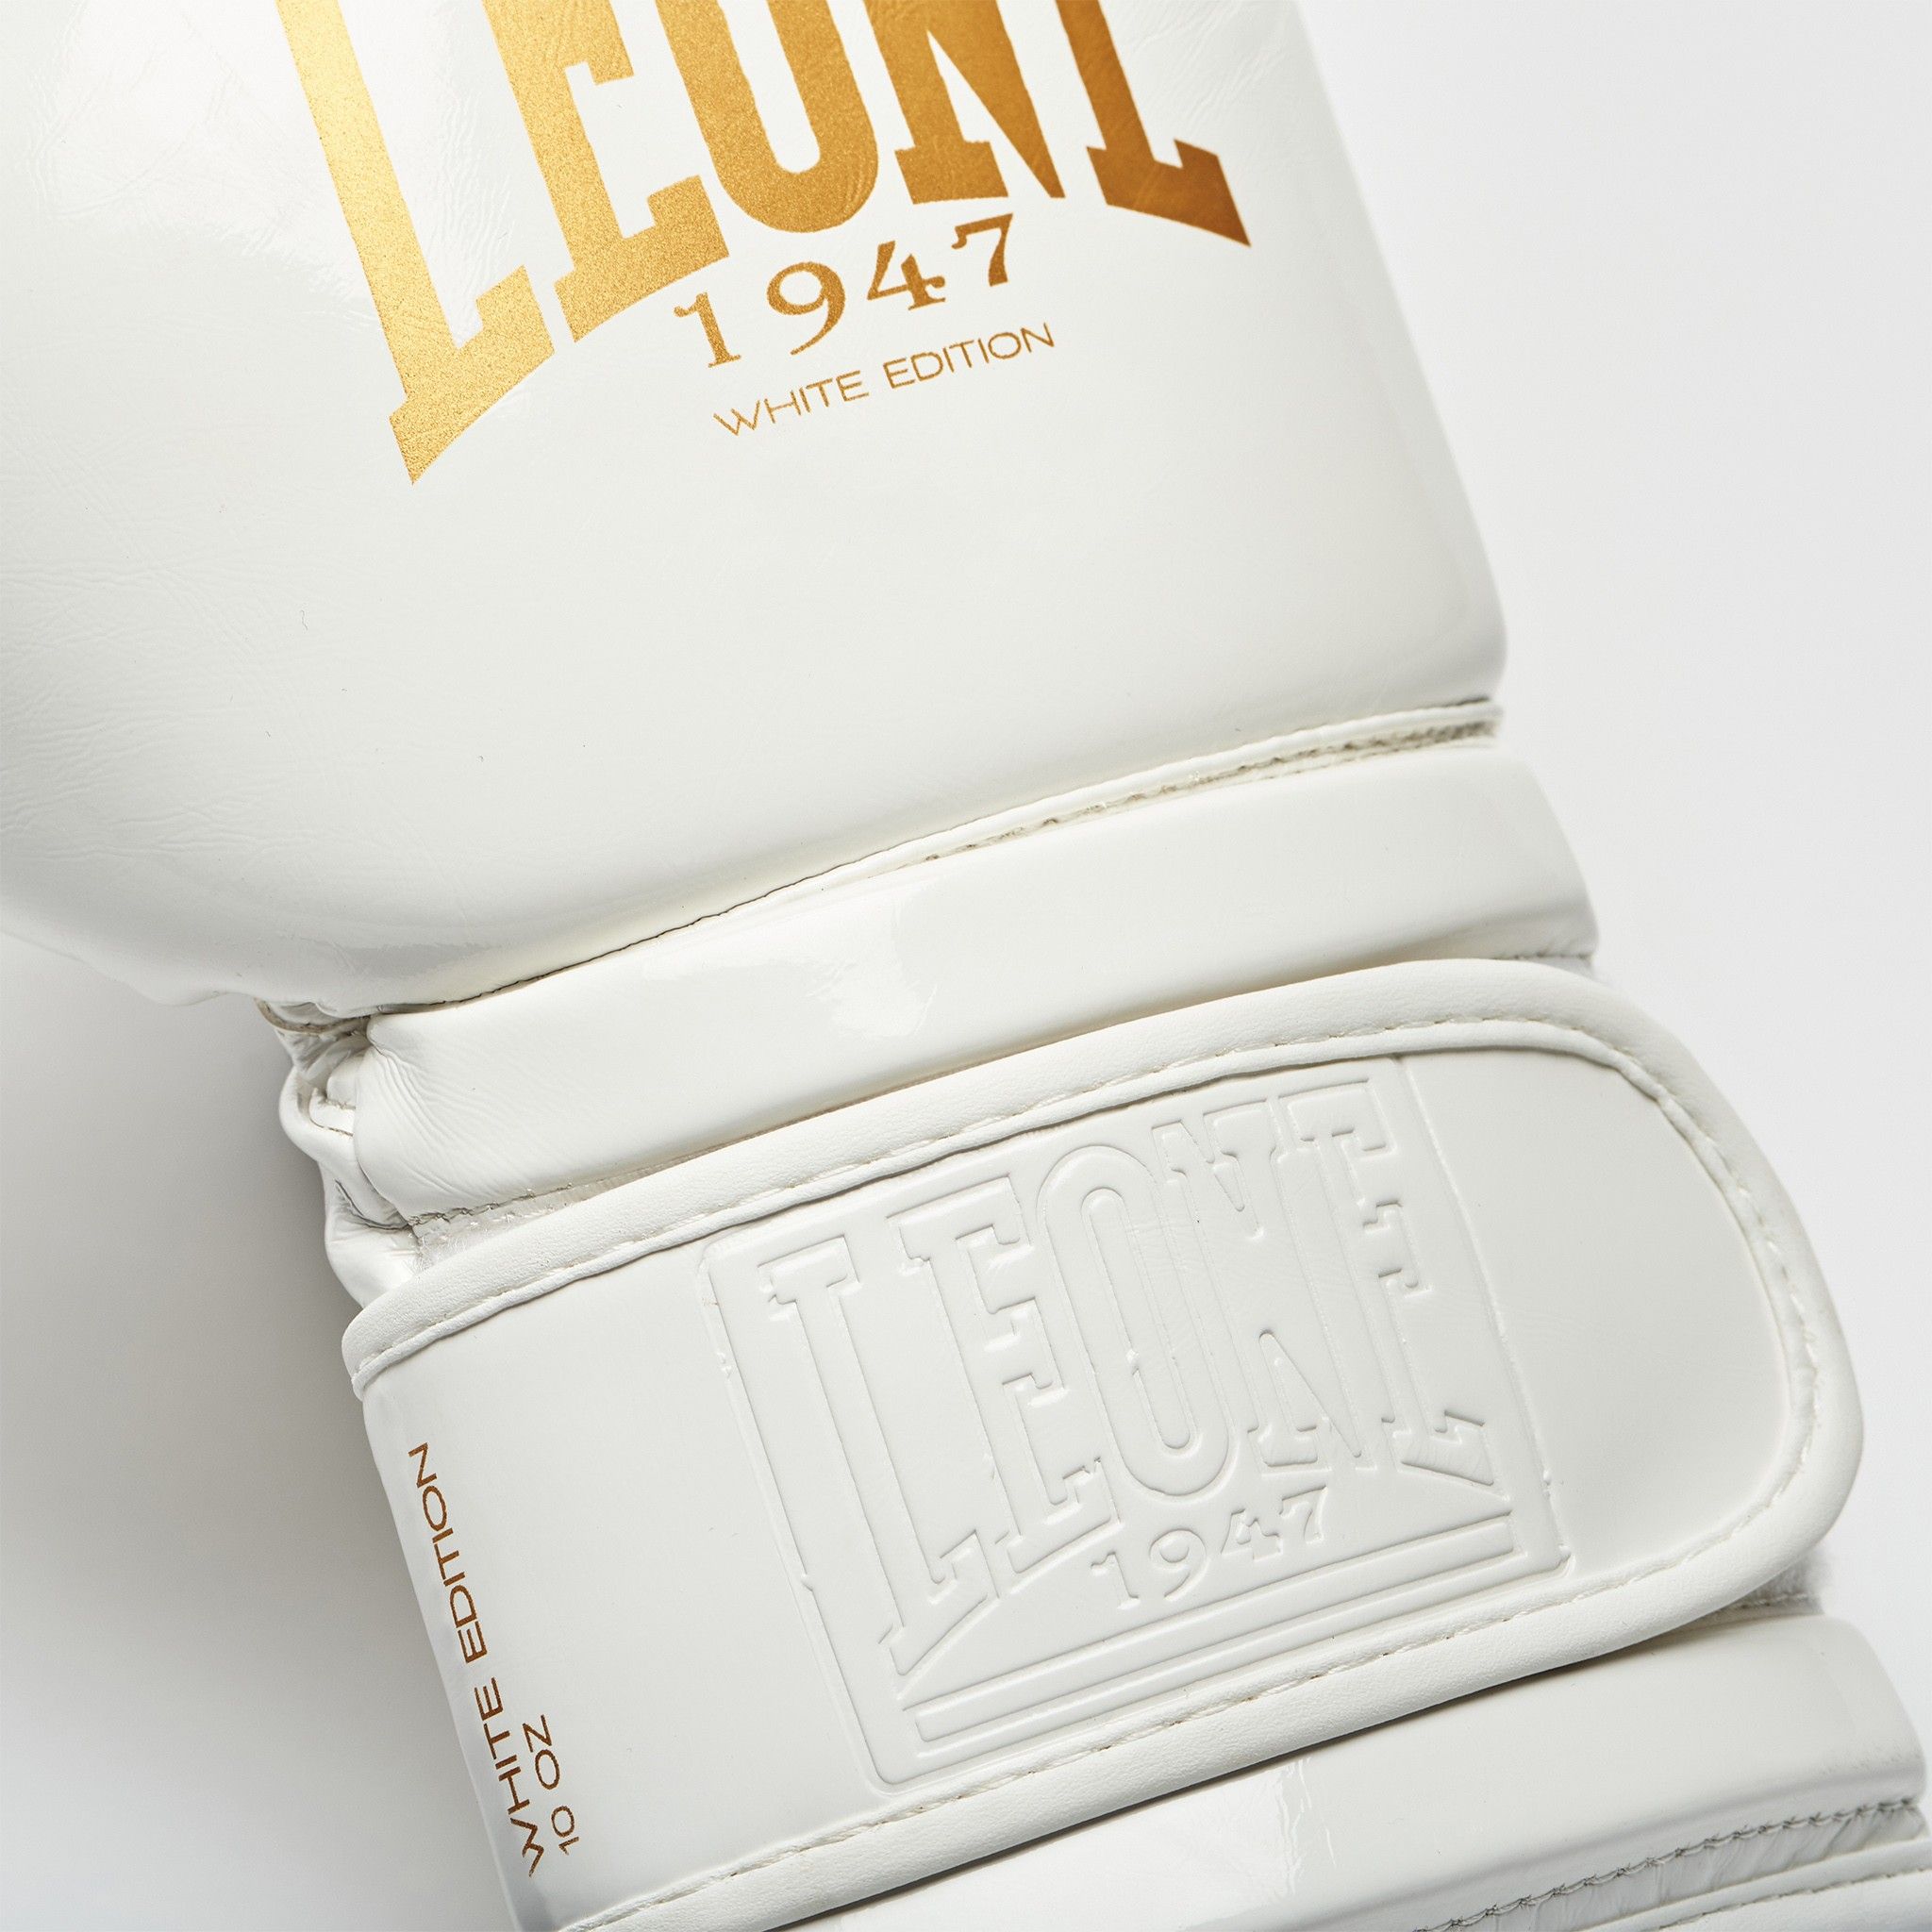 Guantes Boxeo Leone Military Edition GN059G